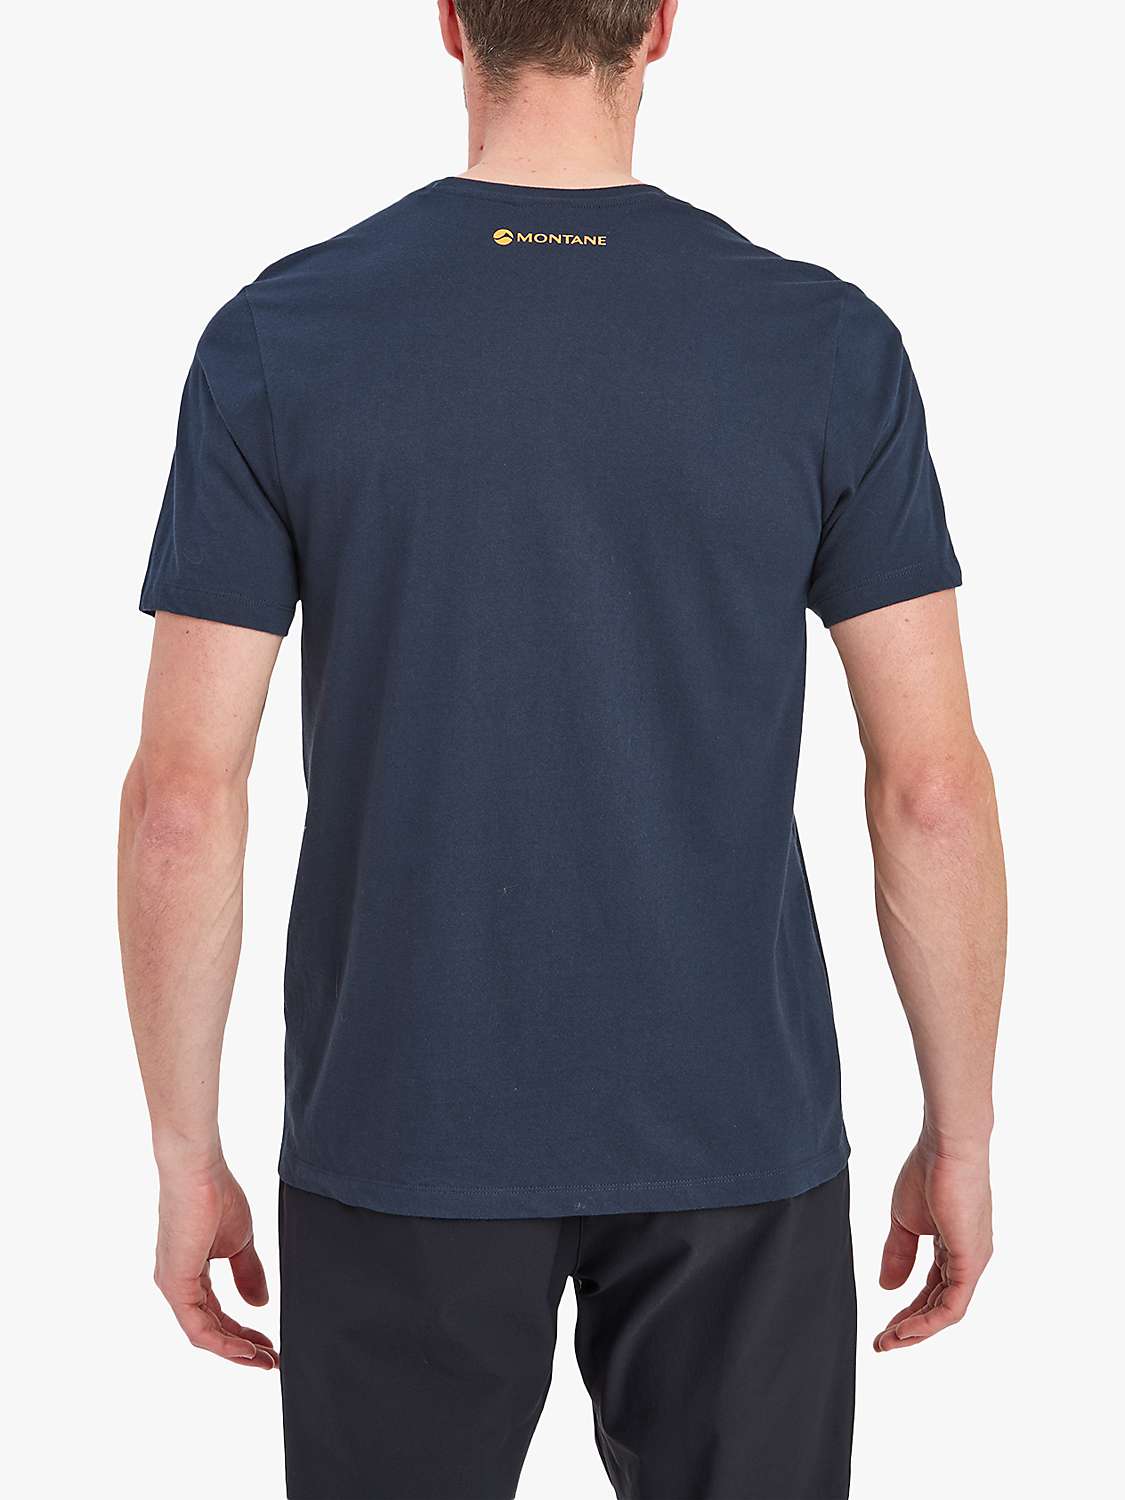 Buy Montane Forest Organic Cotton Top Online at johnlewis.com